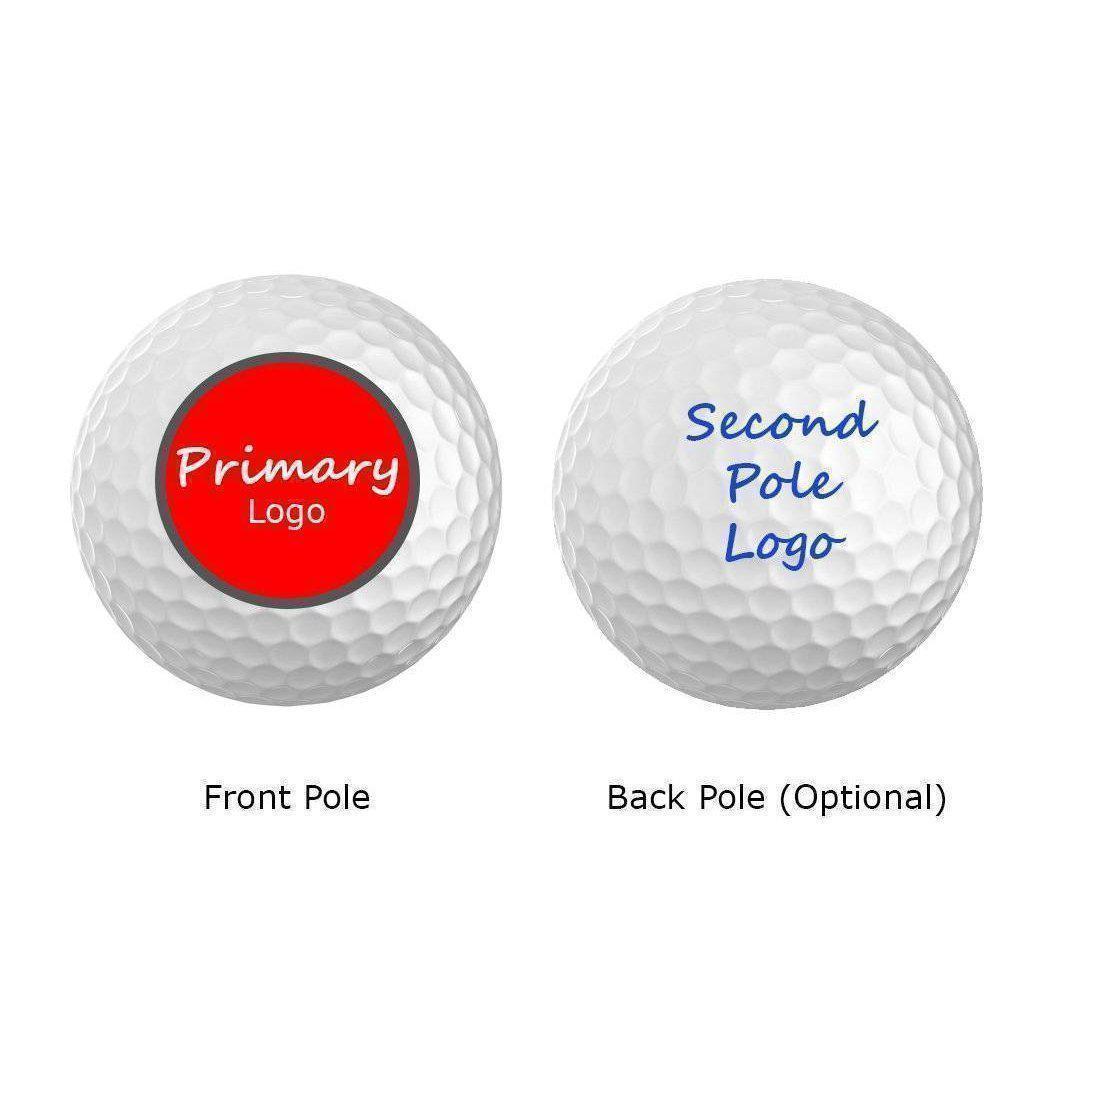 Logo Golf Ball - Second Pole Decoration - TaylorMade/Noodle